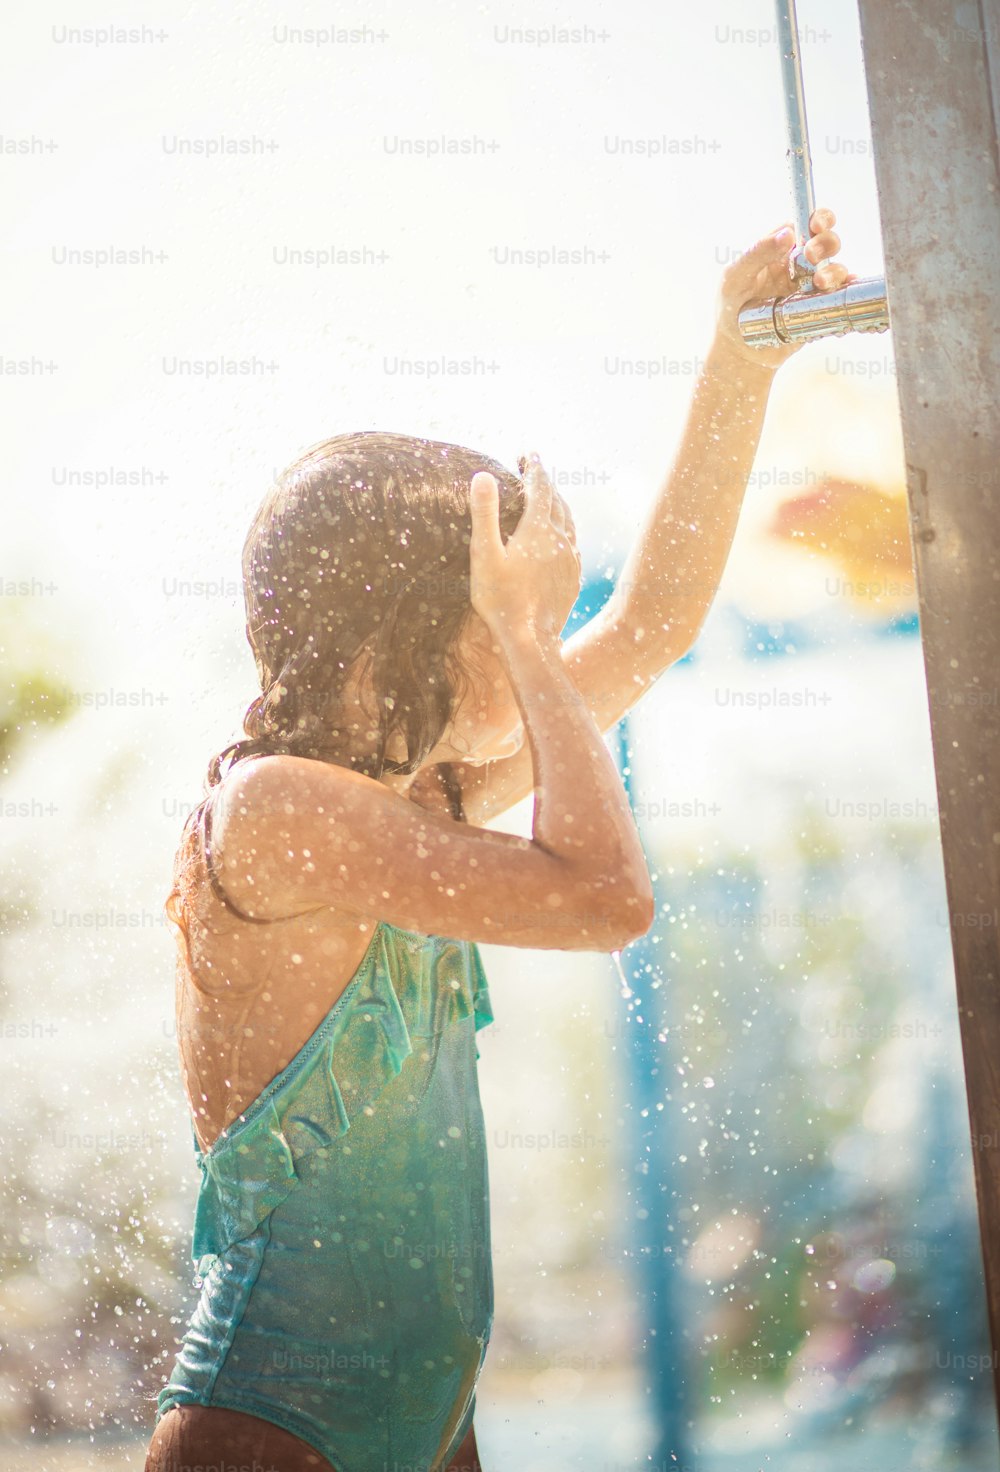 Refreshing. Child showering after pool.